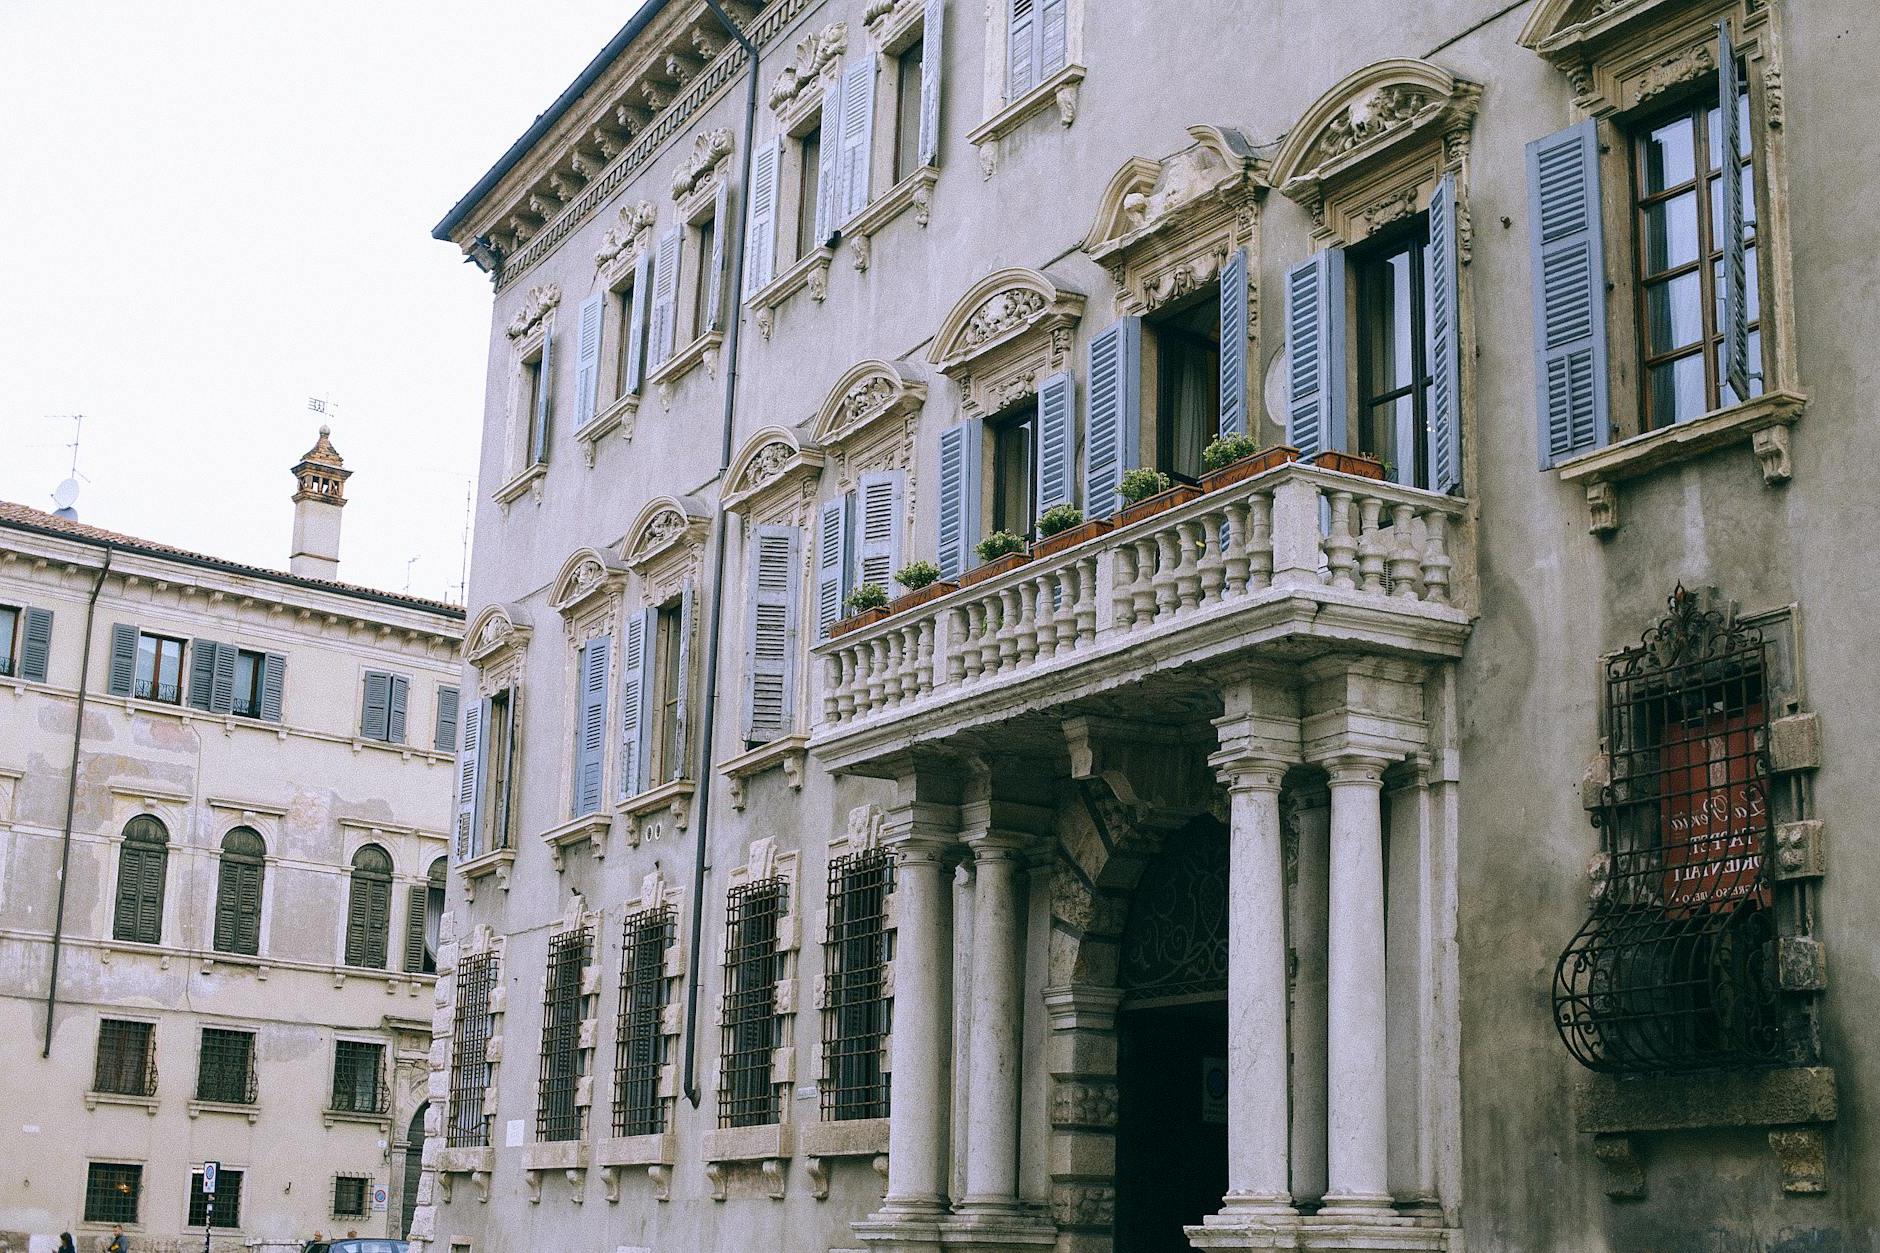 Facade of ancient classic building with balcony and columns located in old city